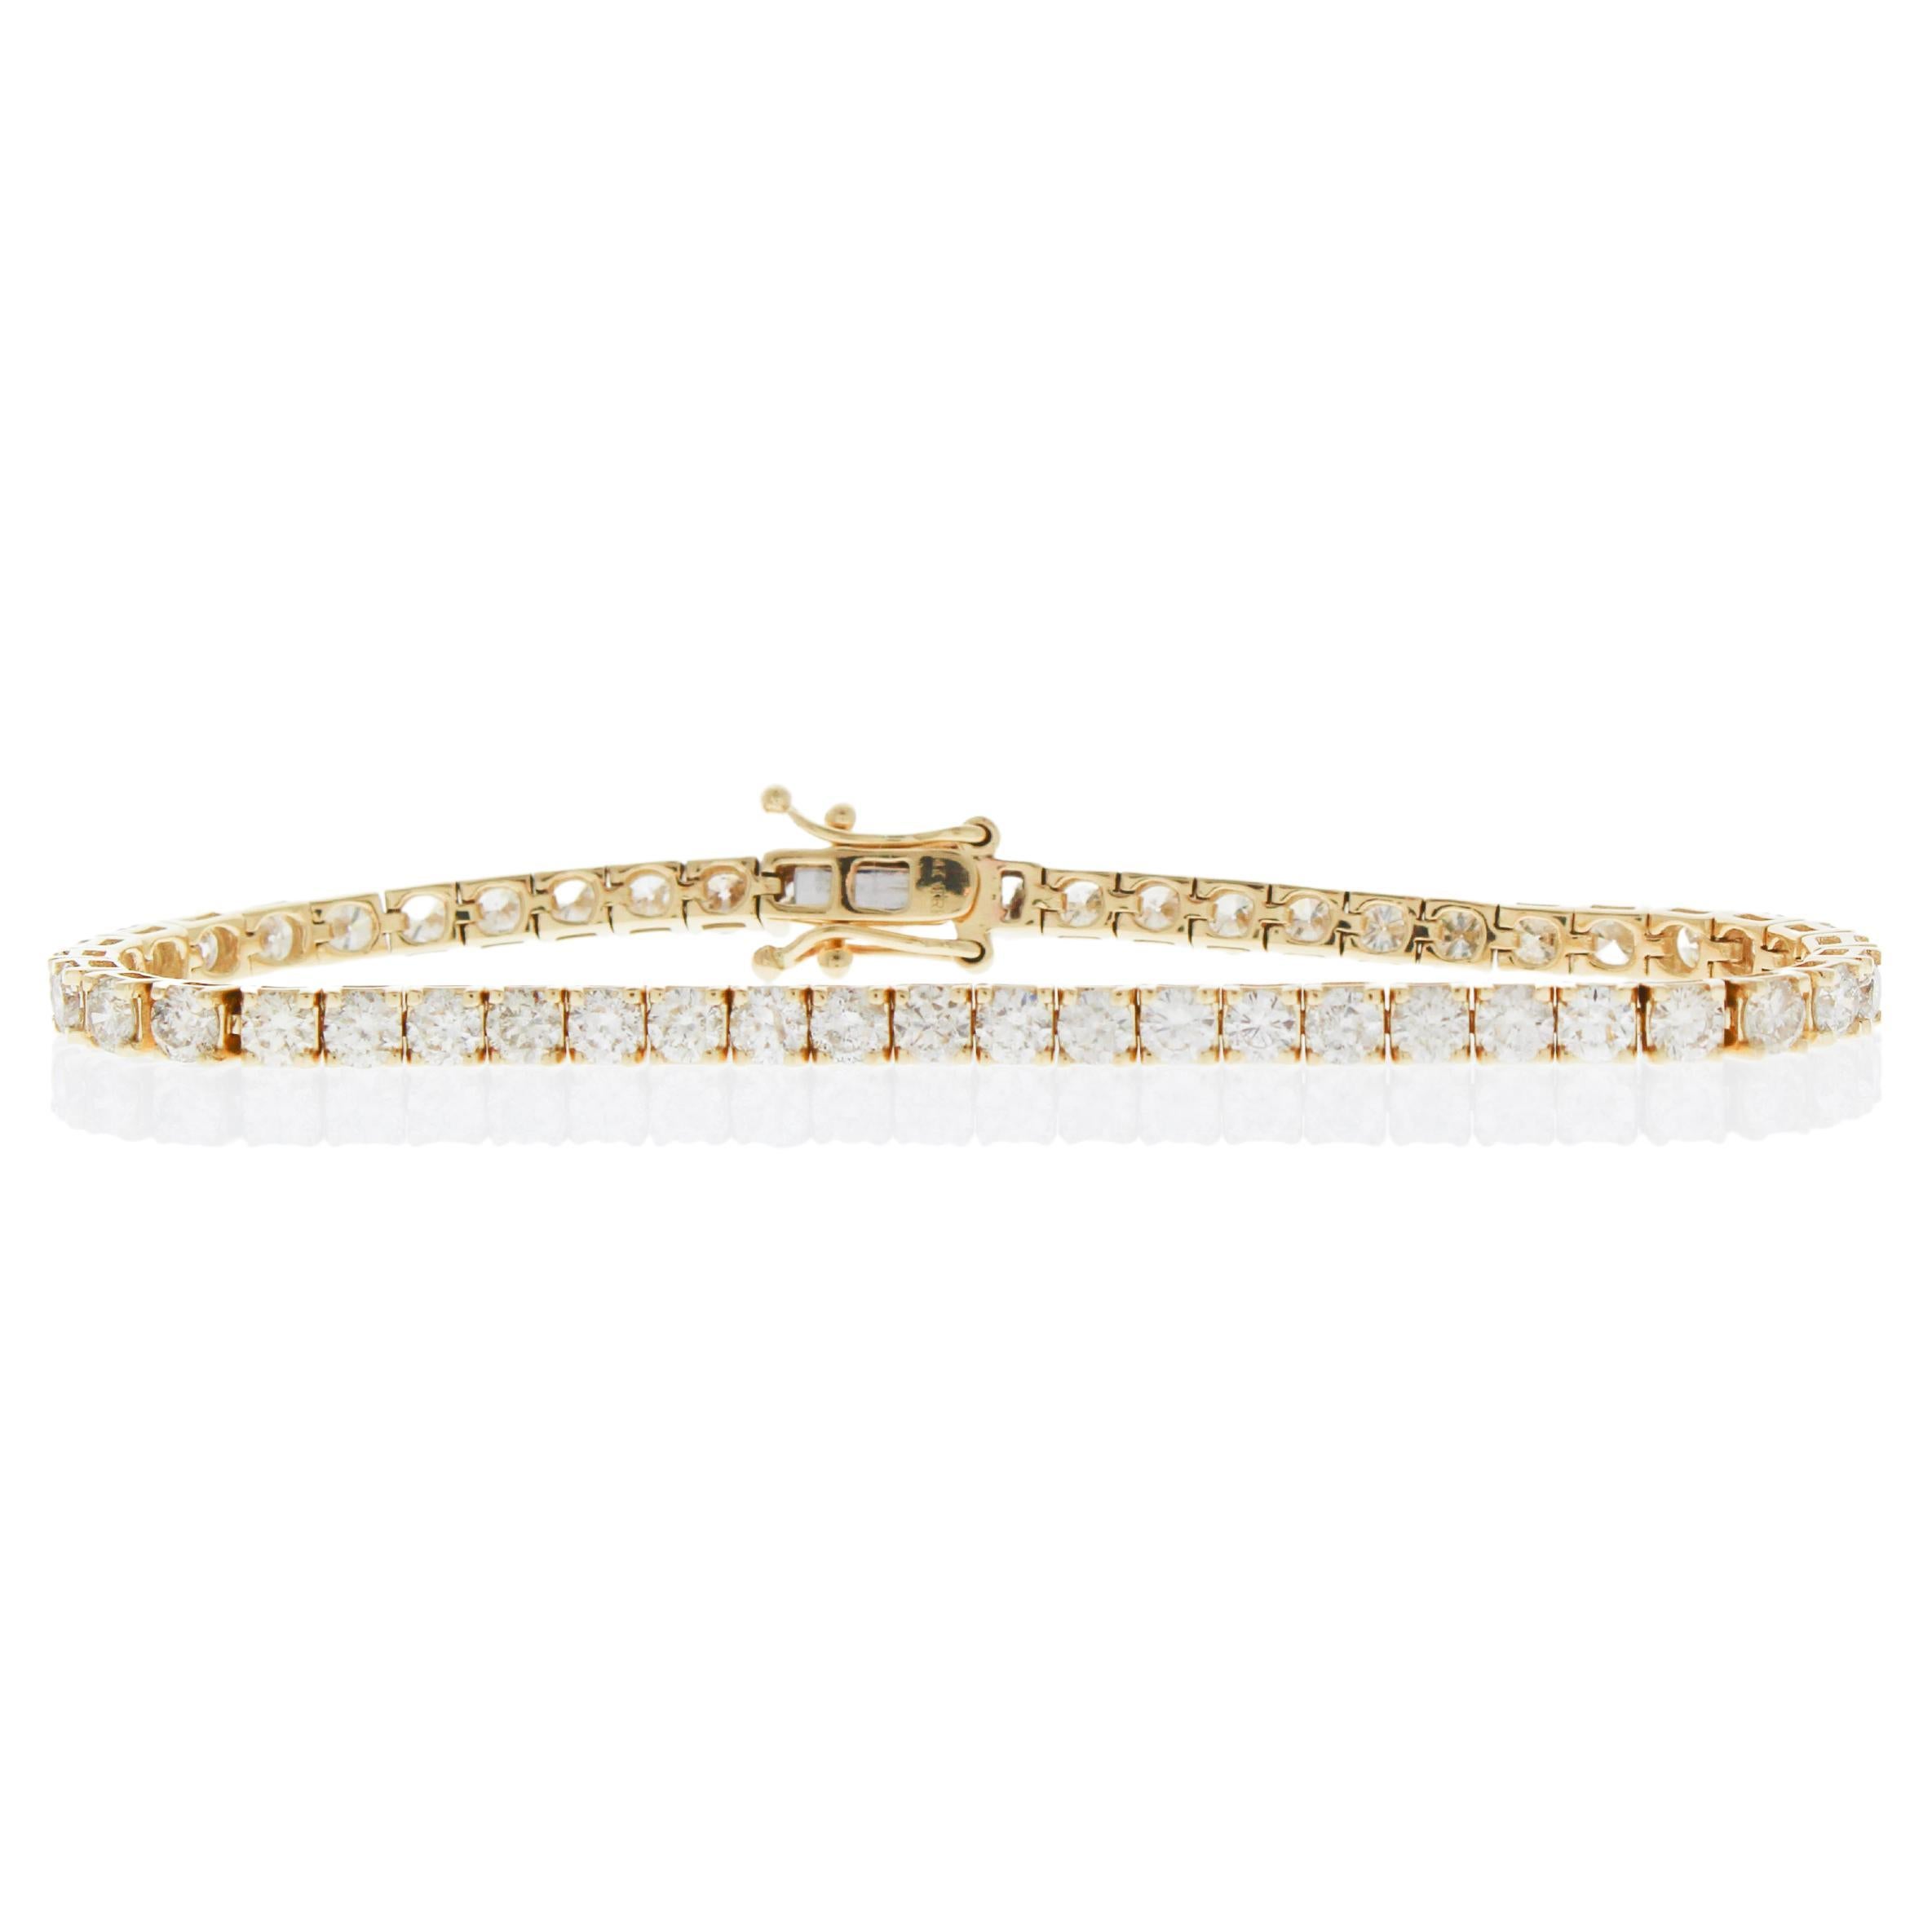 15.00 Carat Natural Round Diamond 4-Prong Tennis Bracelet in 14k Yellow Gold			 For Sale